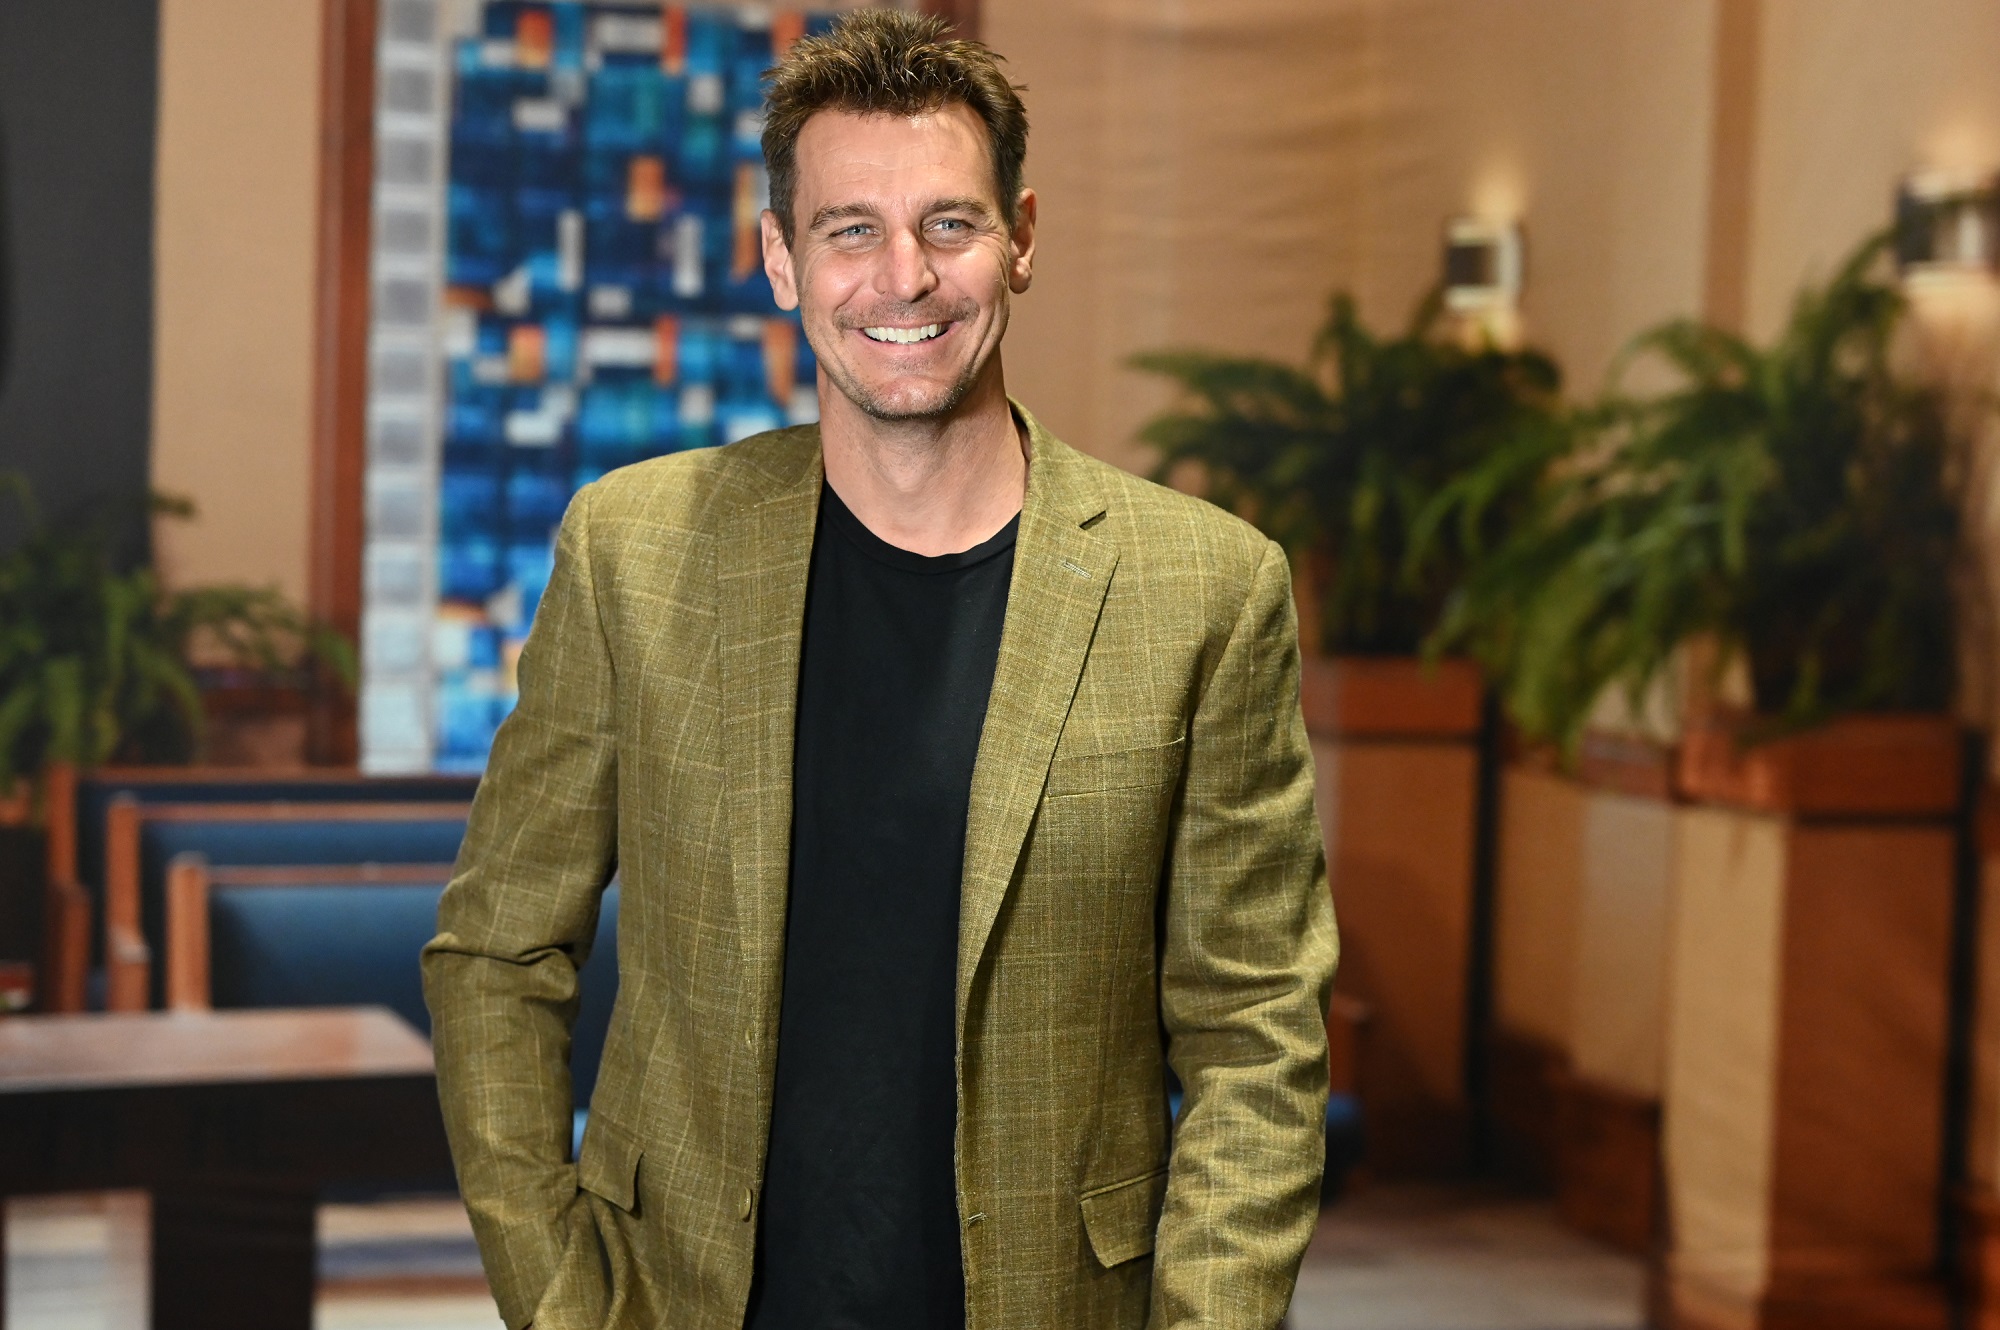 General Hospital is once again mired in controversy thanks to Ingo Rademacher, pictured here in a tweed jacket at Graceland